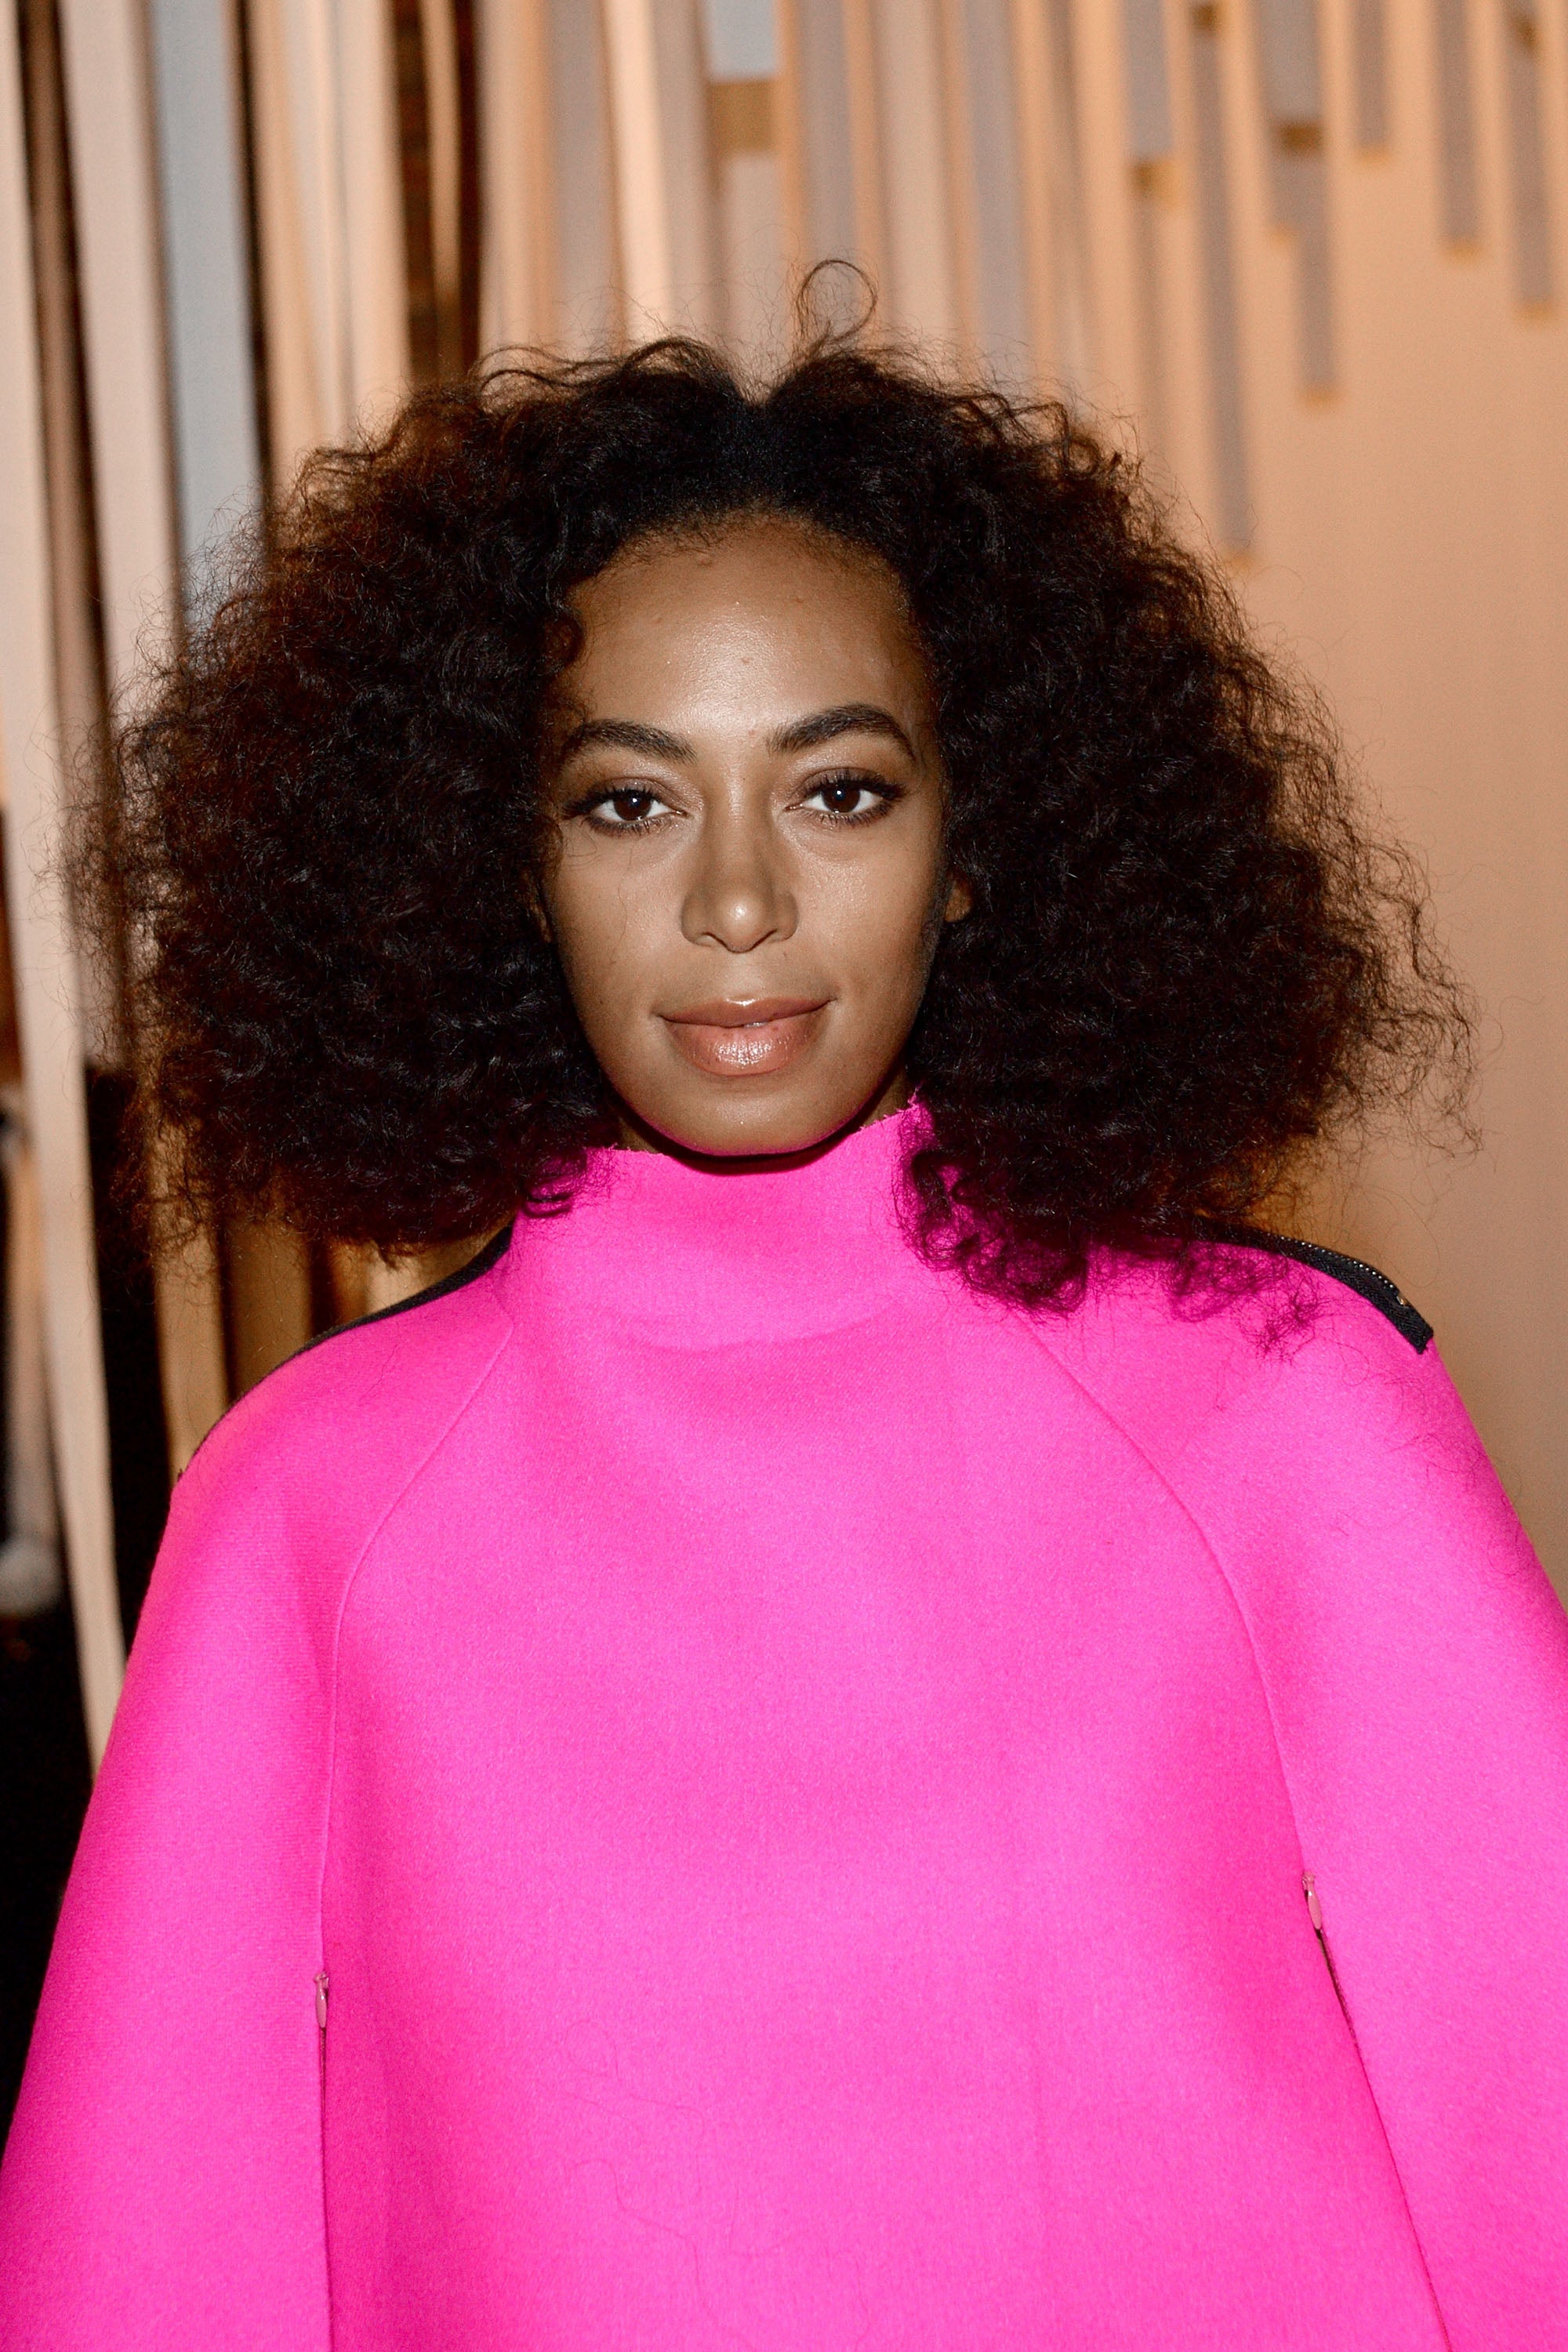 Solange Is Looking For New Band Members So Don't Miss Your Shot For 'A Seat At The Table'
